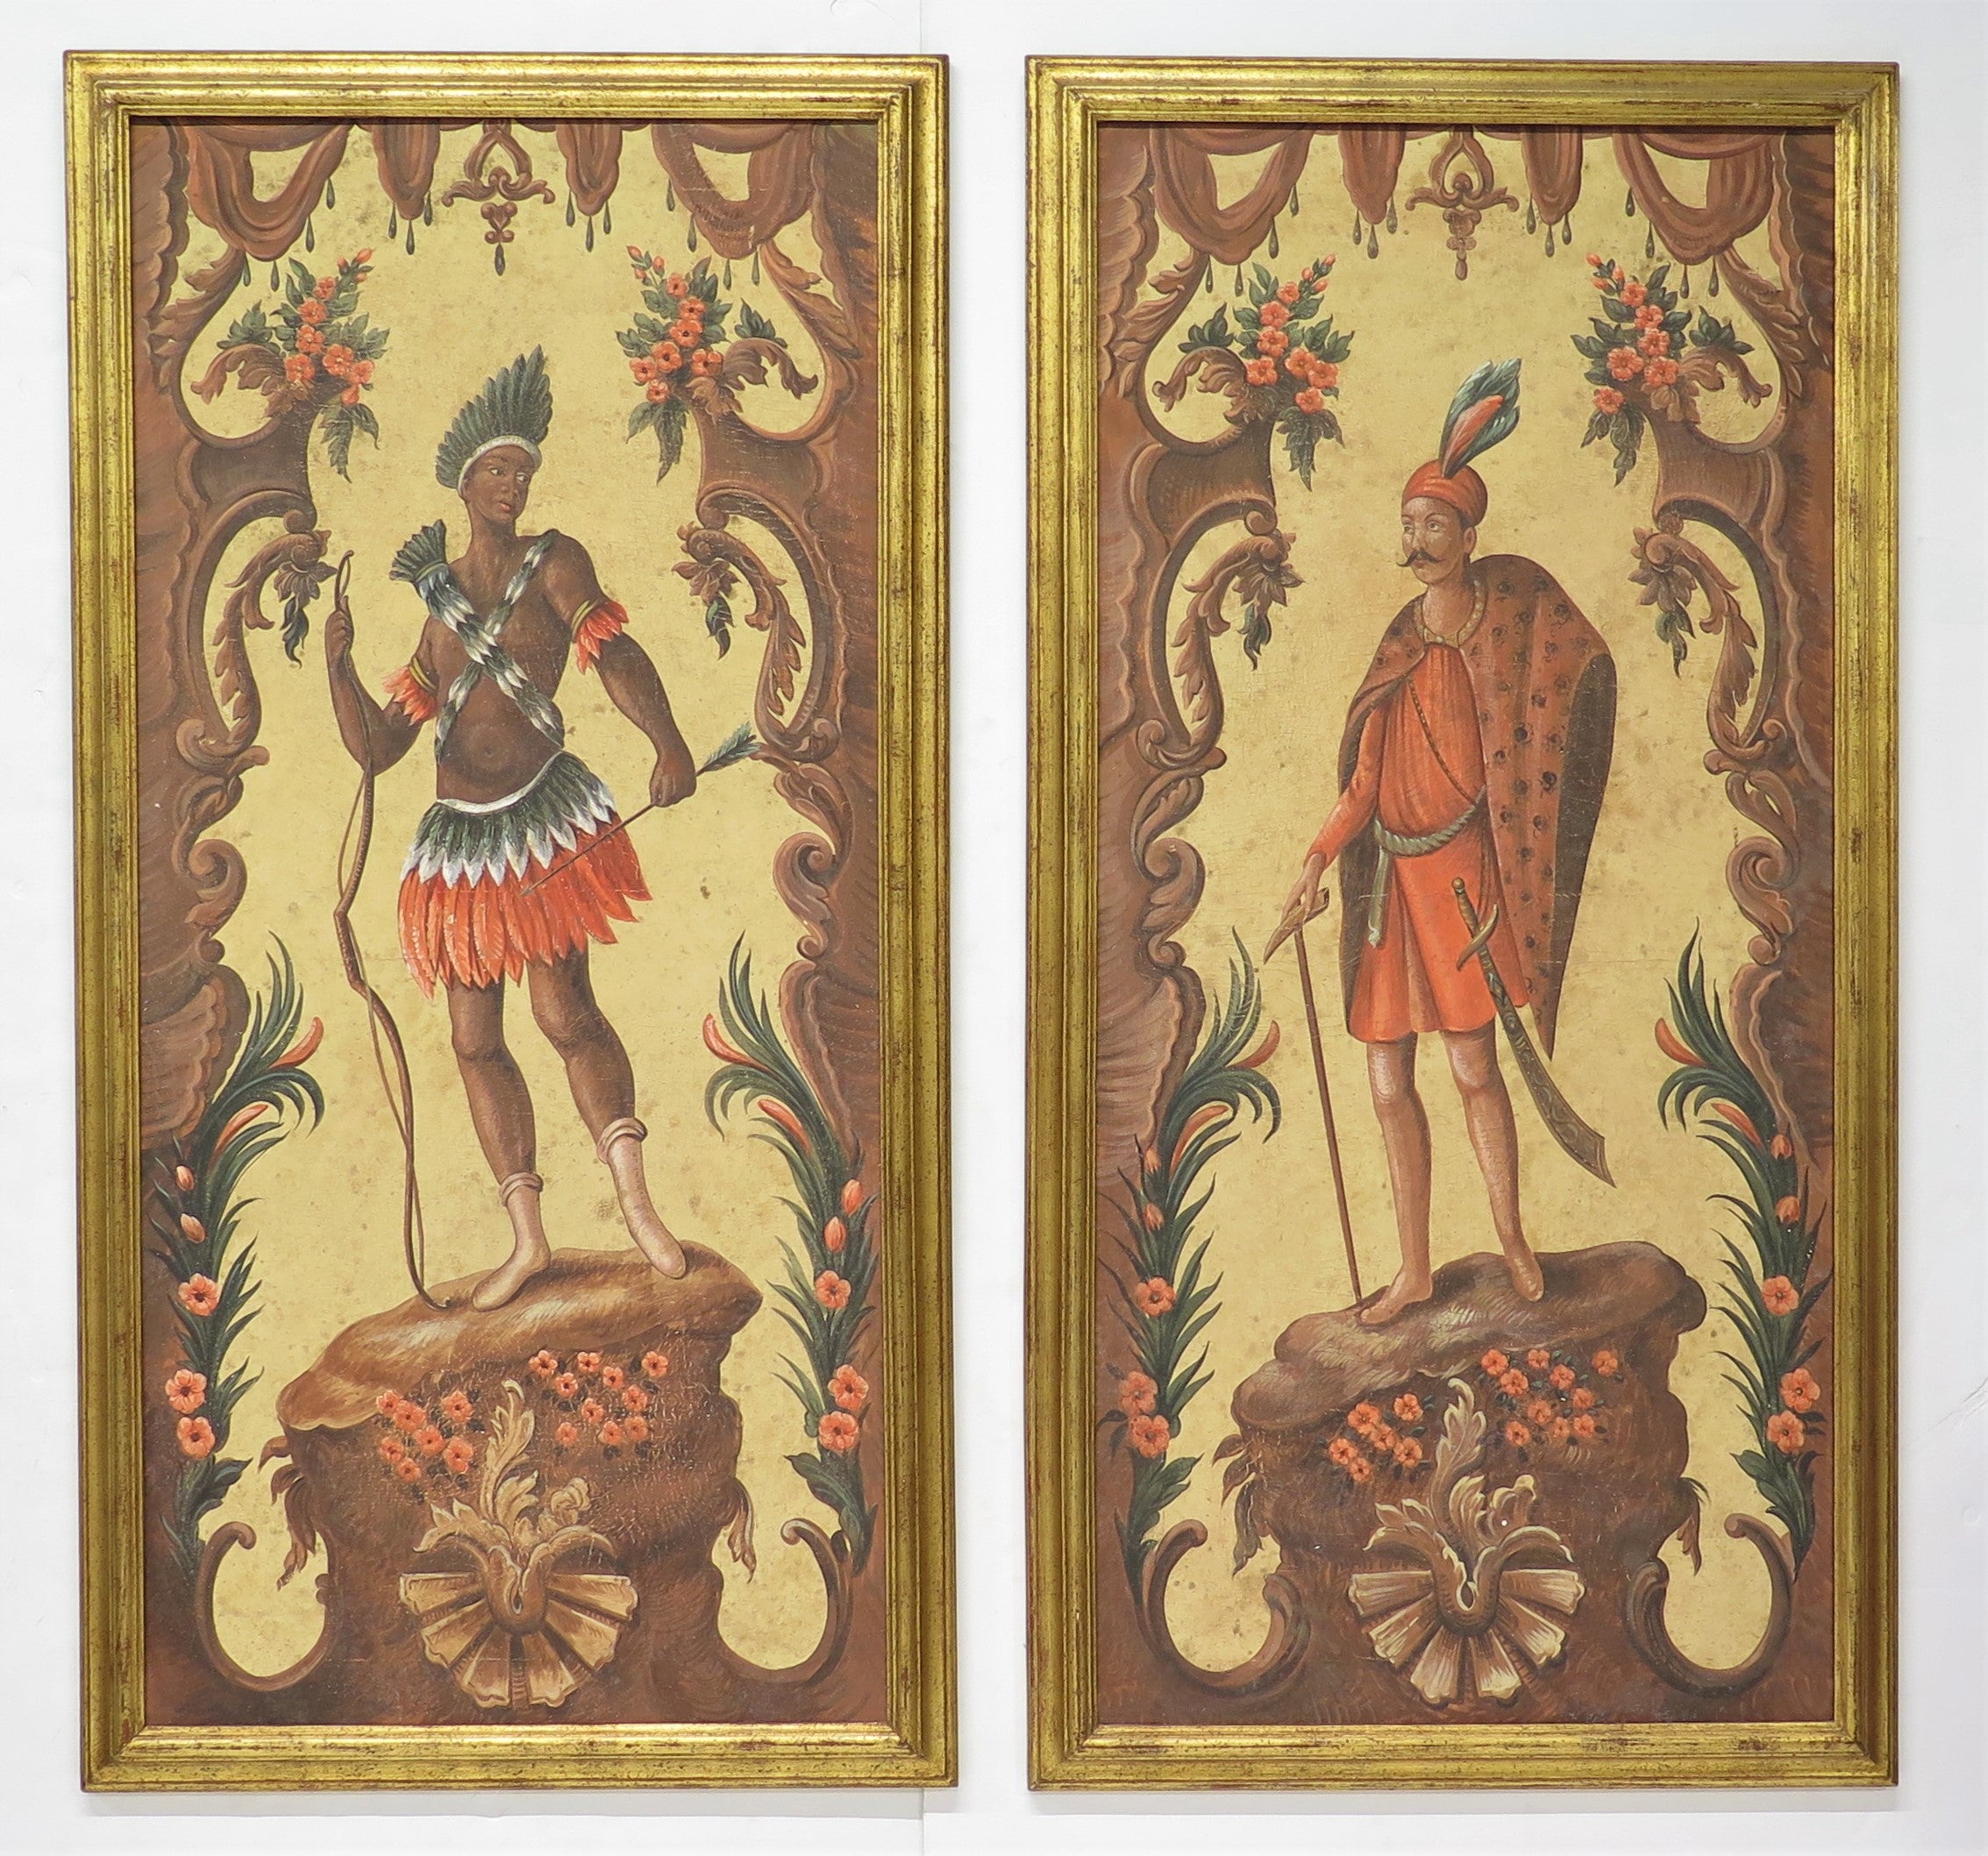 Pair of Continental Paintings / Panels, Depicting Allegories of Africa and Asia